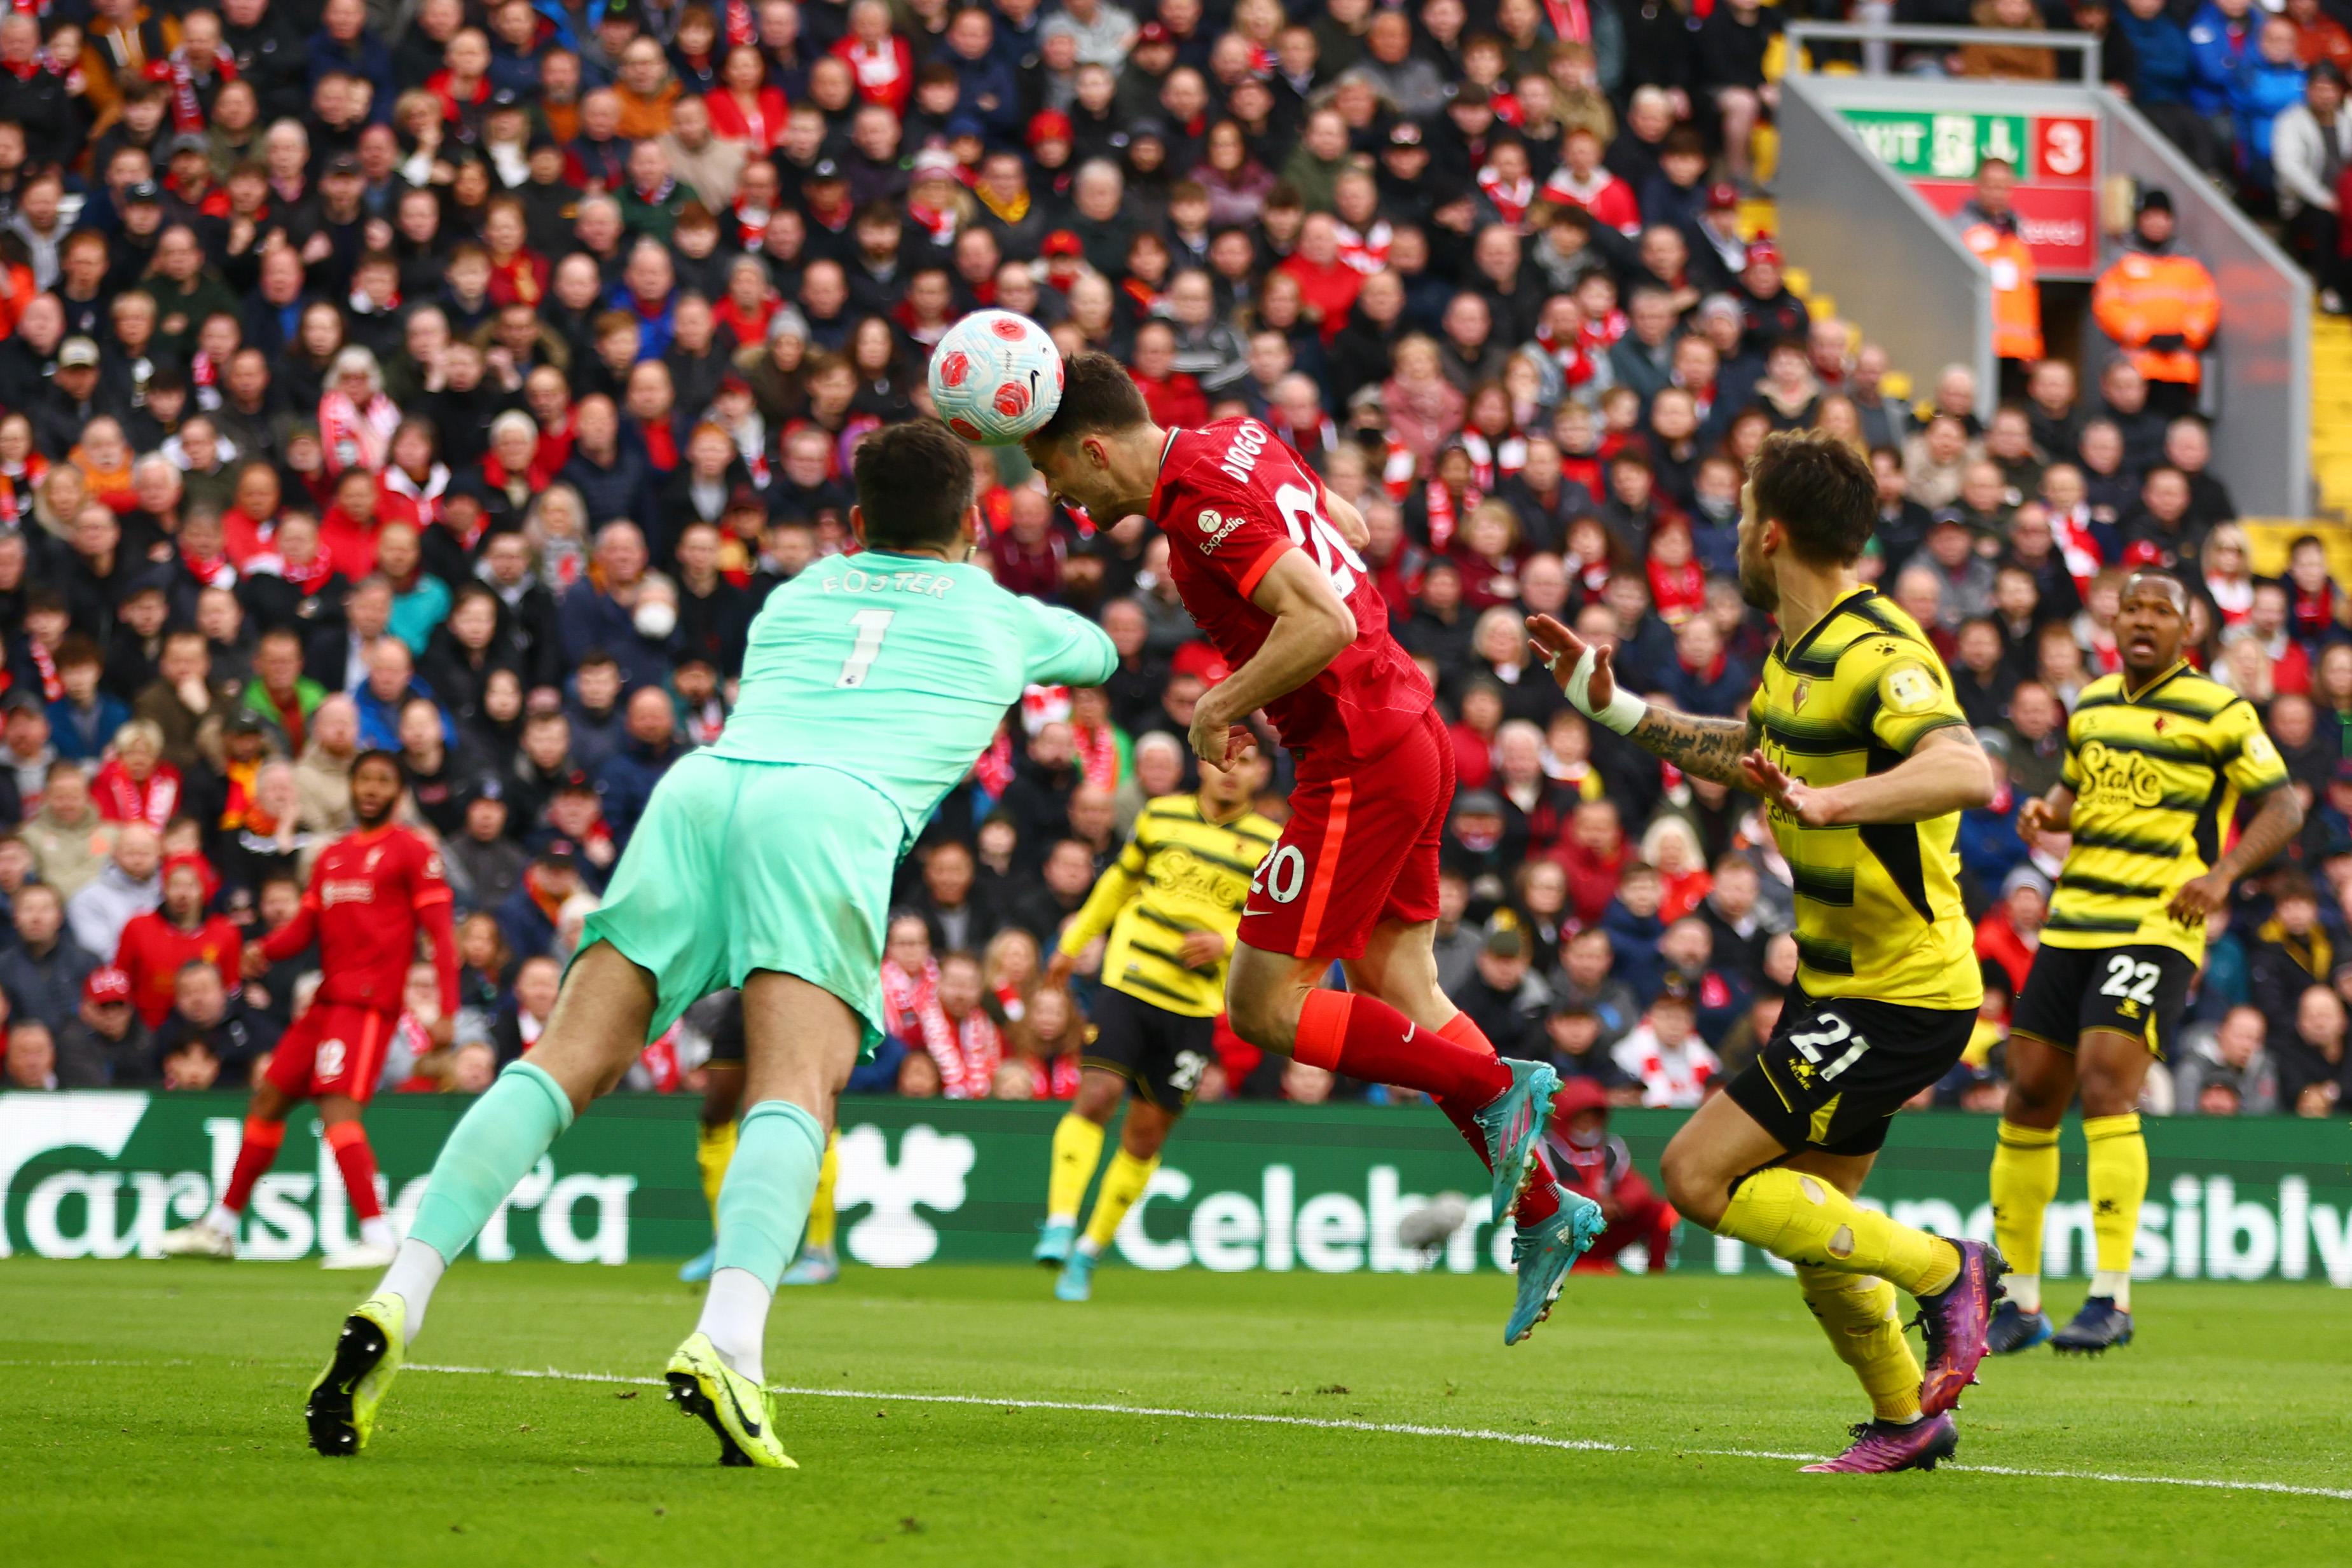 Liverpool 2-0 Watford Live: Liverpool lead Man City in Premier League TITLE RACE as the Reds score through Jota and Fabinho to beat Watford 2-0 at Anfield